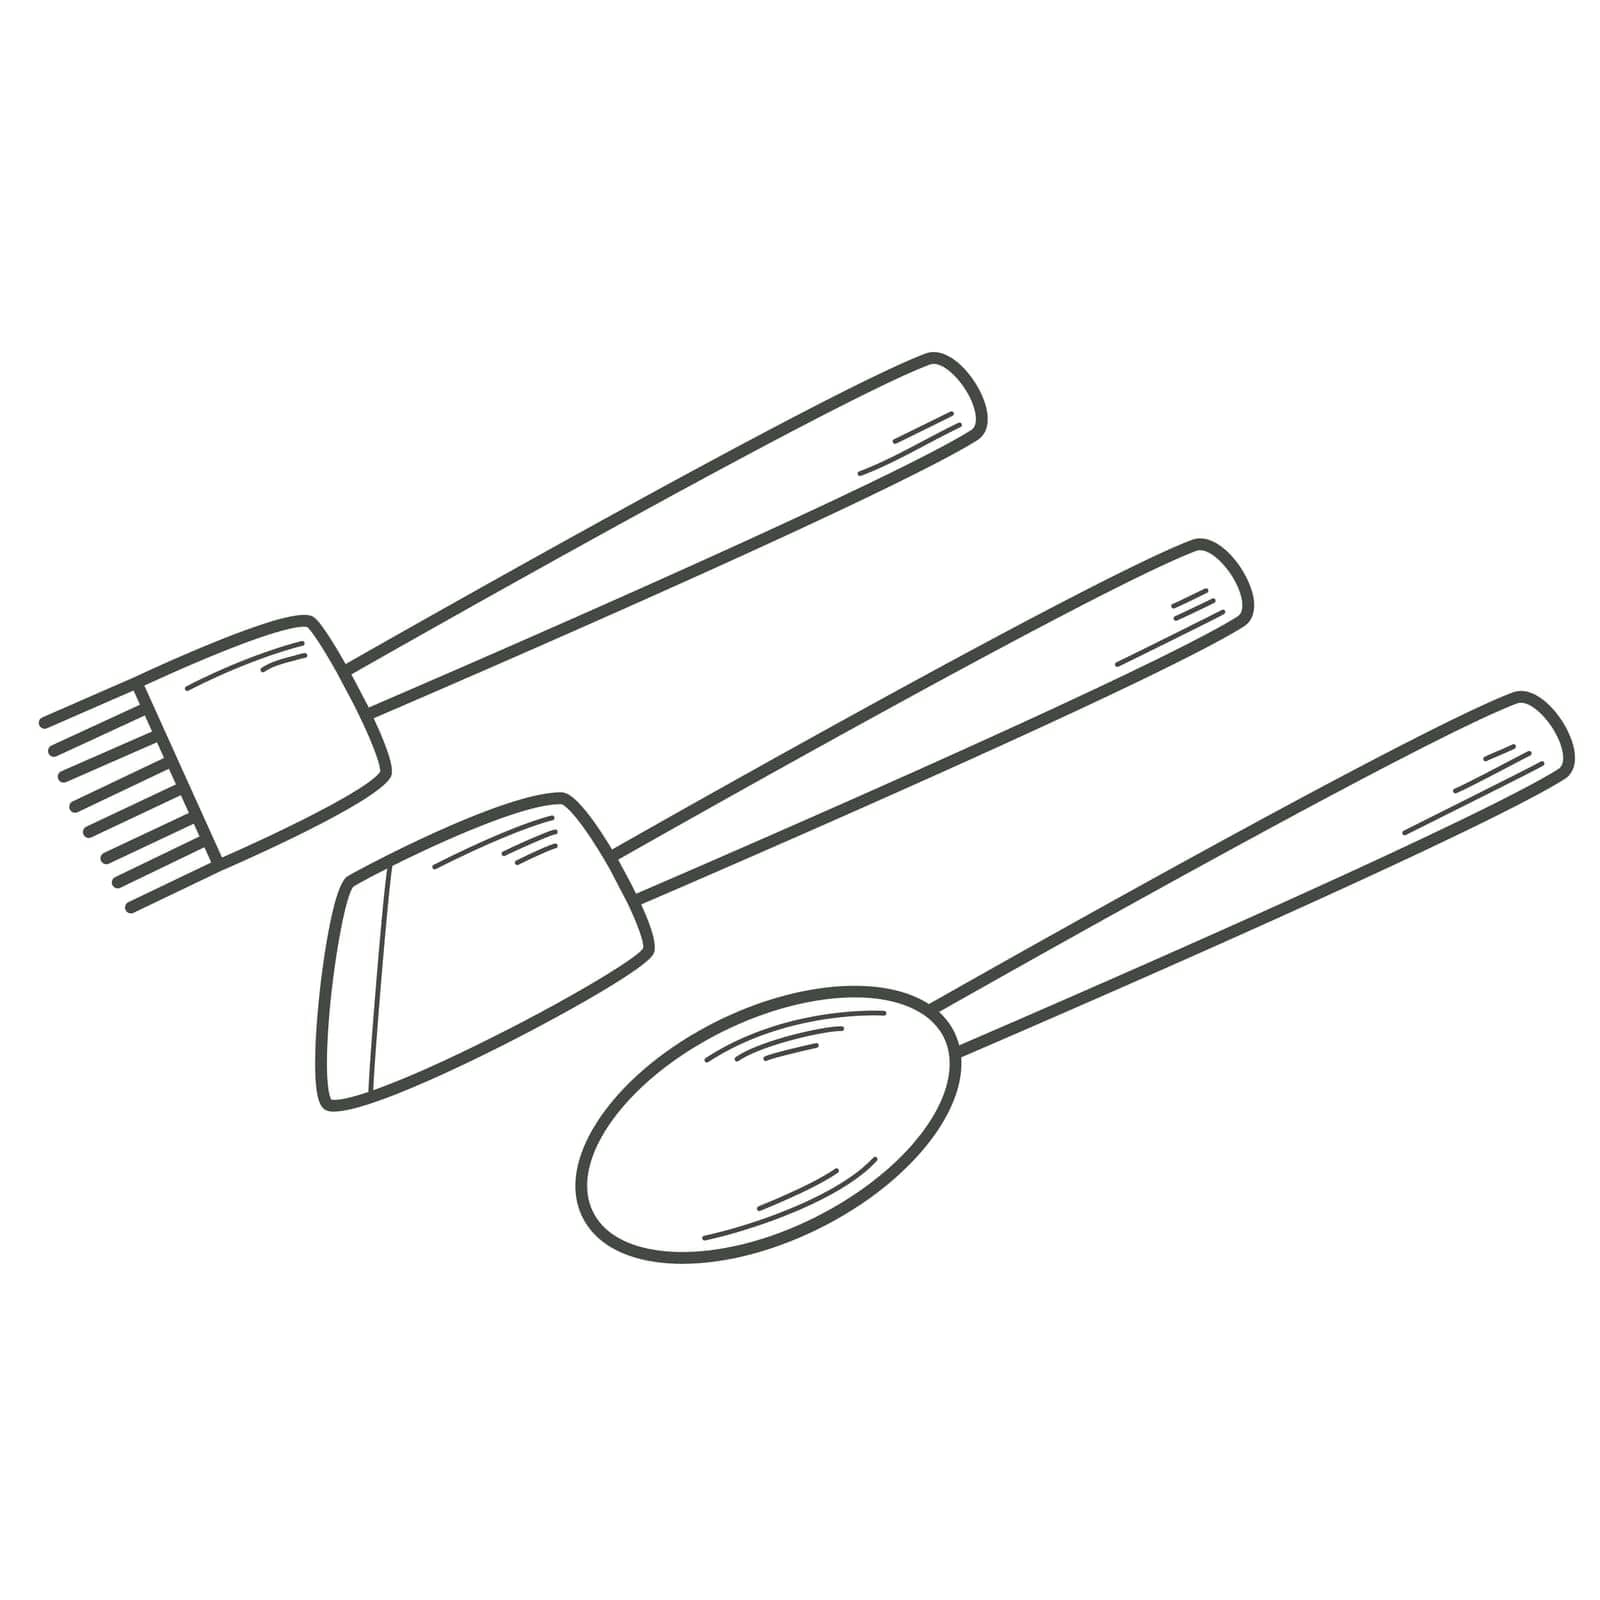 Kitchen spatula doodle sketch style. Cooking set spoon, brush, spatula art. Simple hand drawn ink icon isolated vector illustration